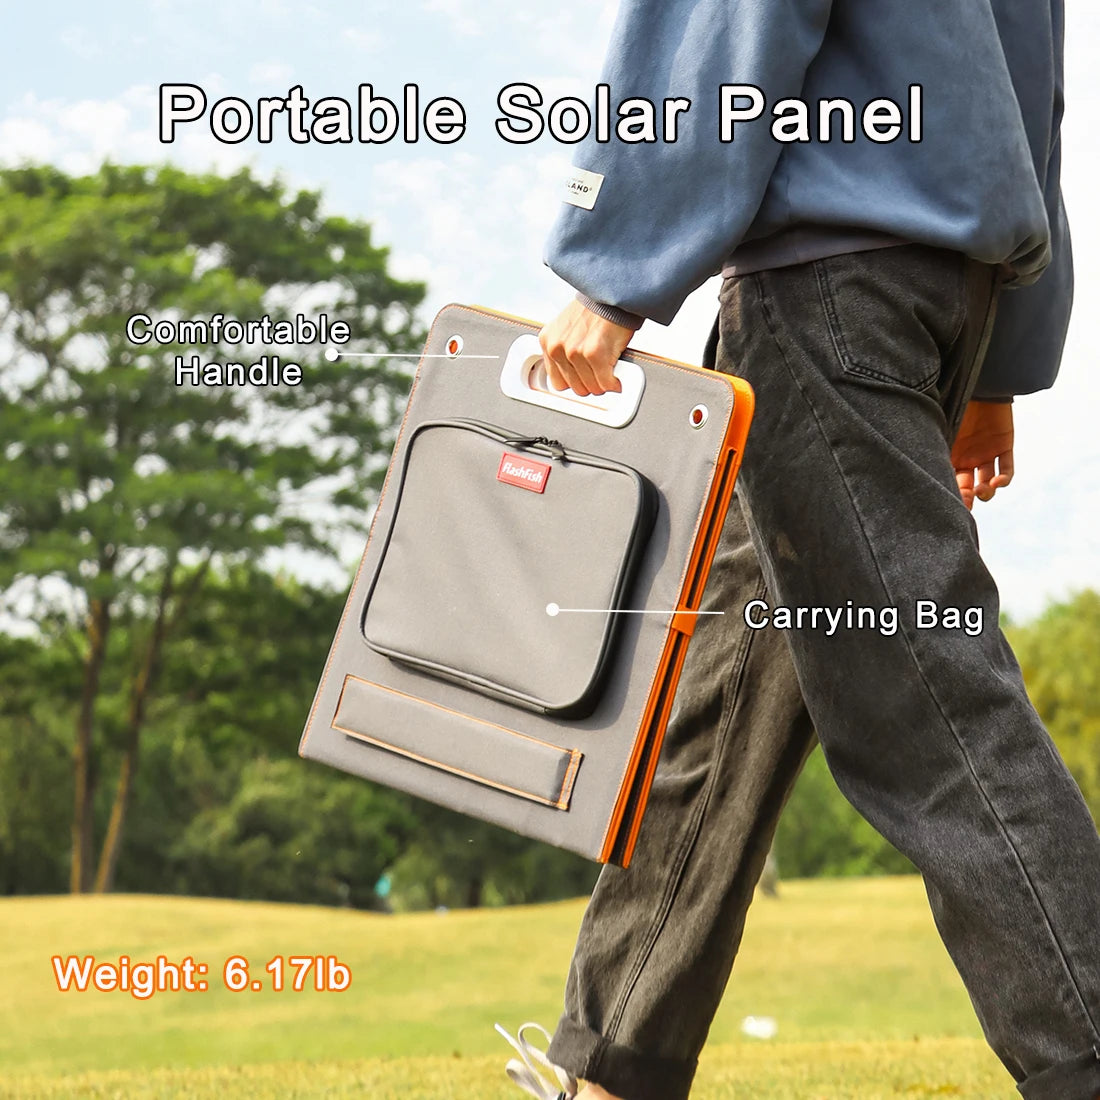 FlashFish Solar Panel, Compact solar panel with comfortable handle and carrying bag, weighing approximately 6.17 pounds.